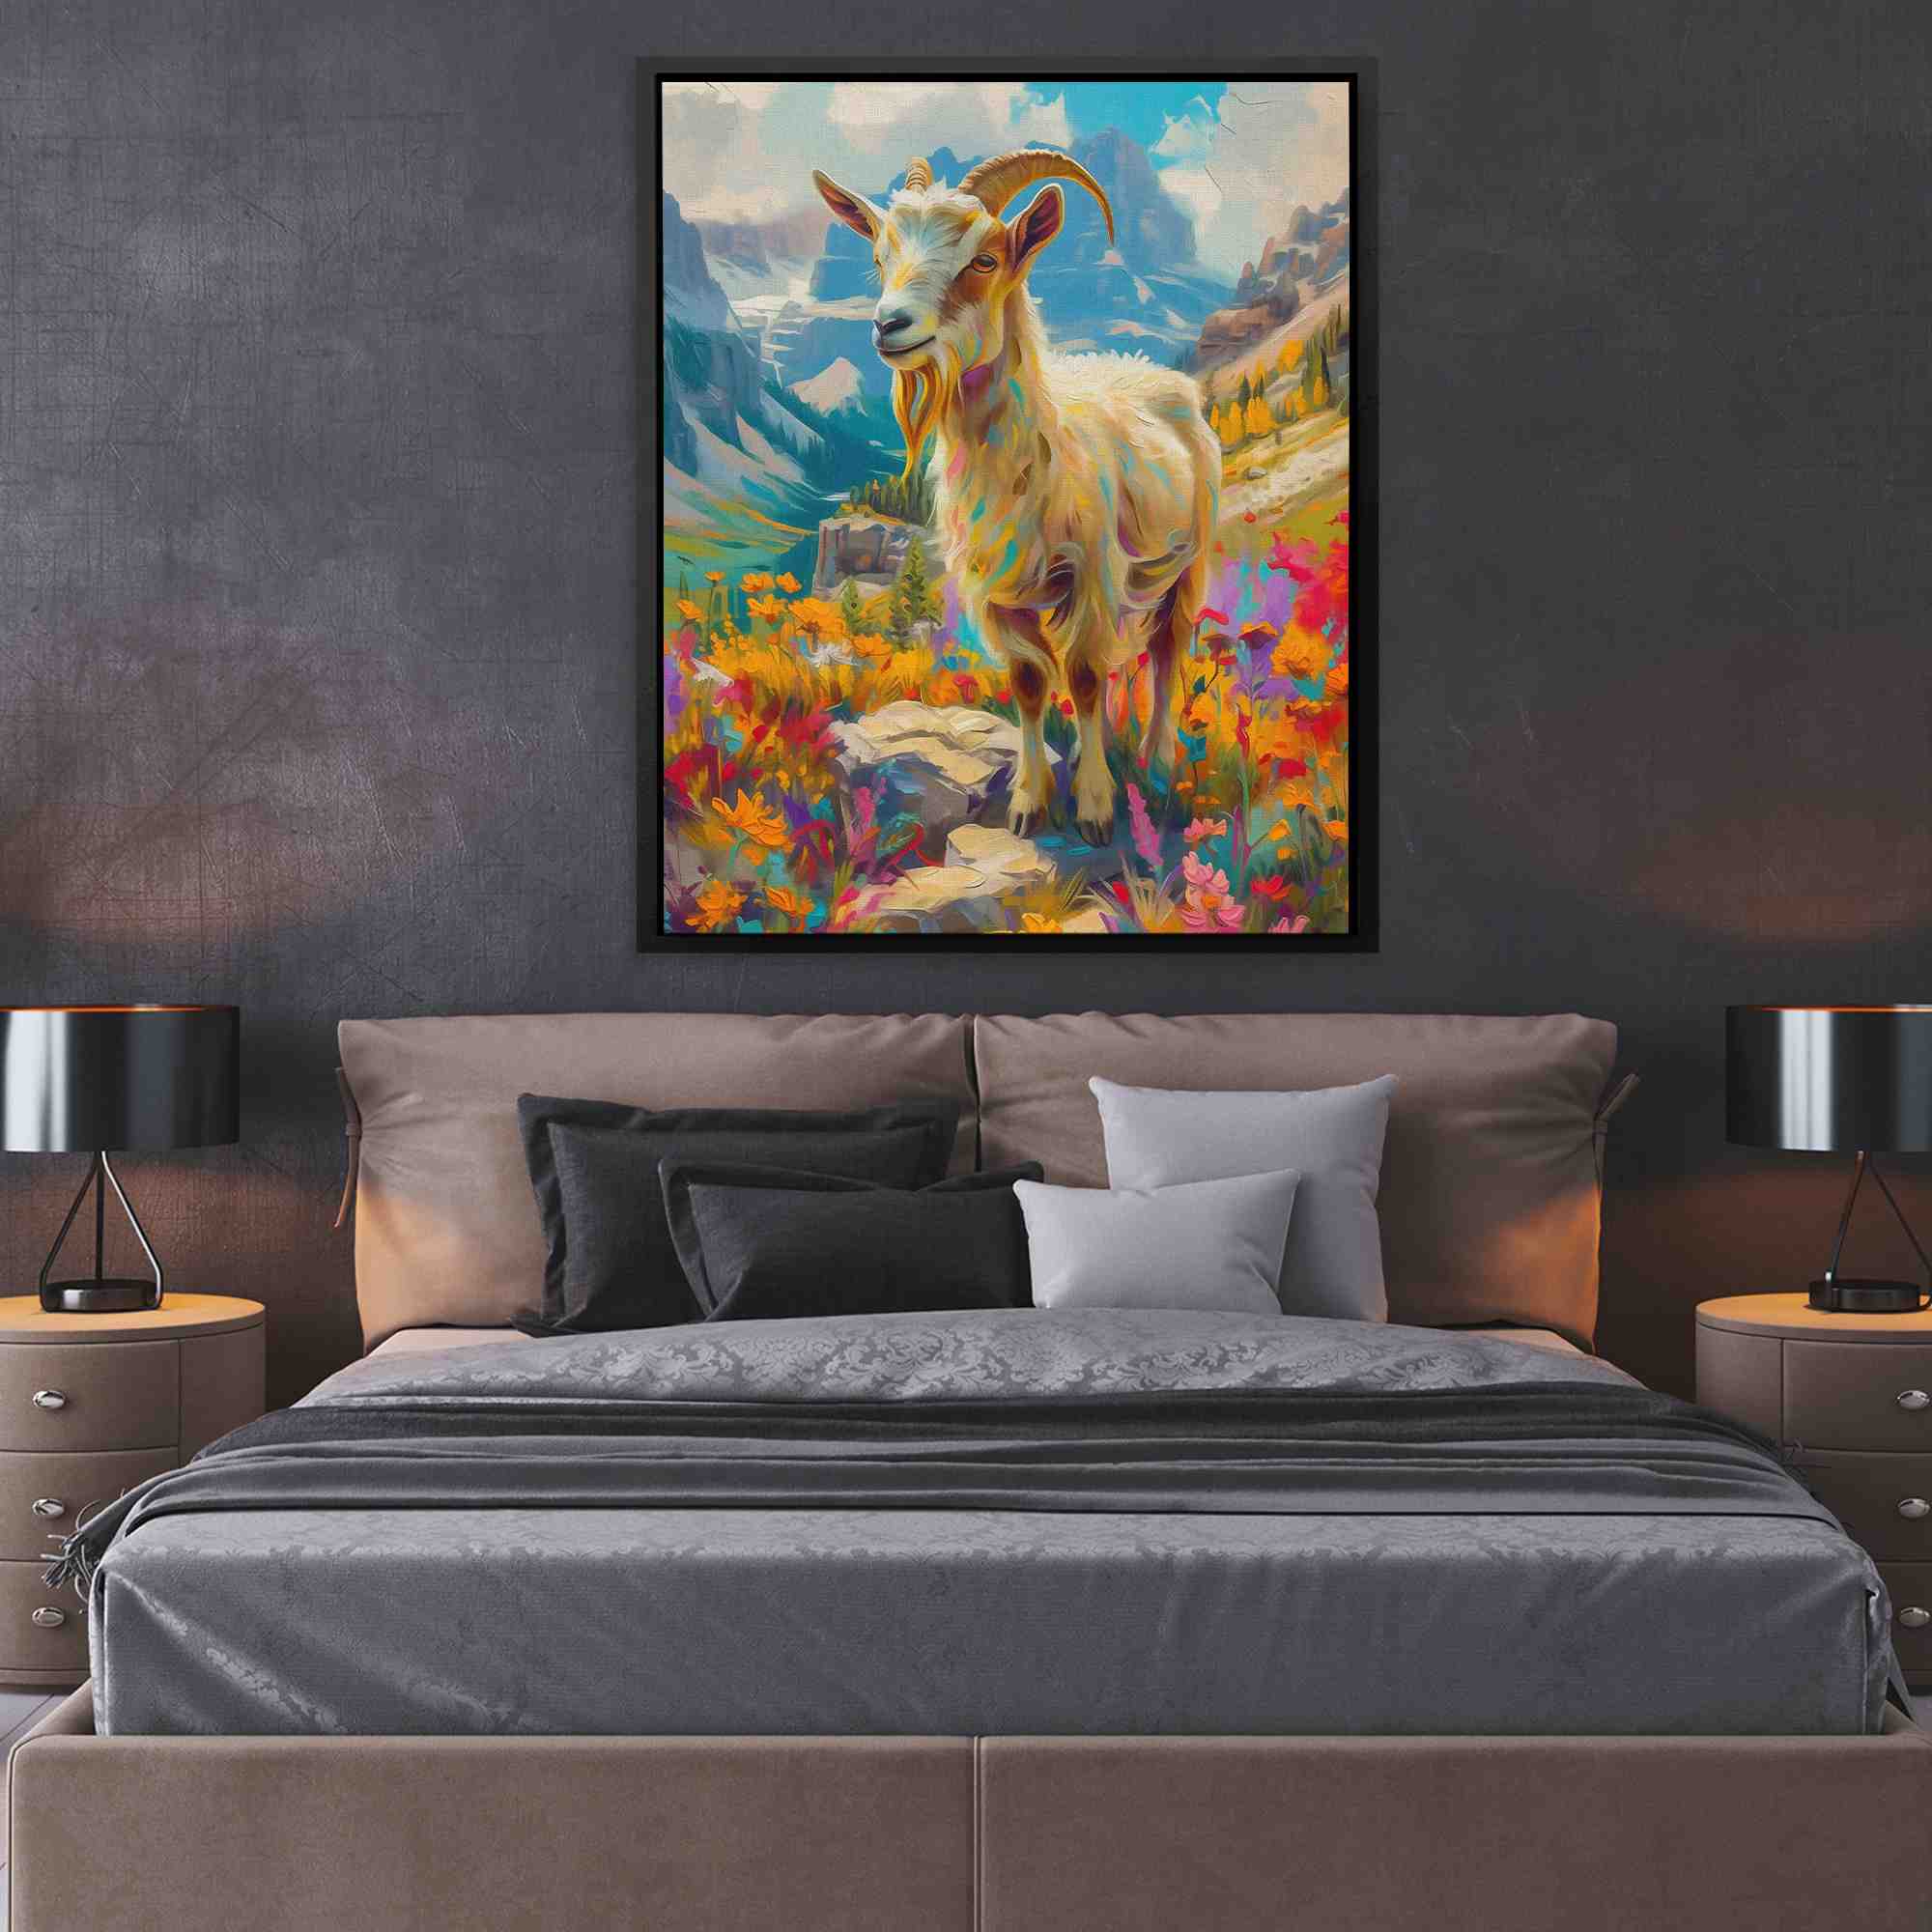 a painting of a goat standing on a hill